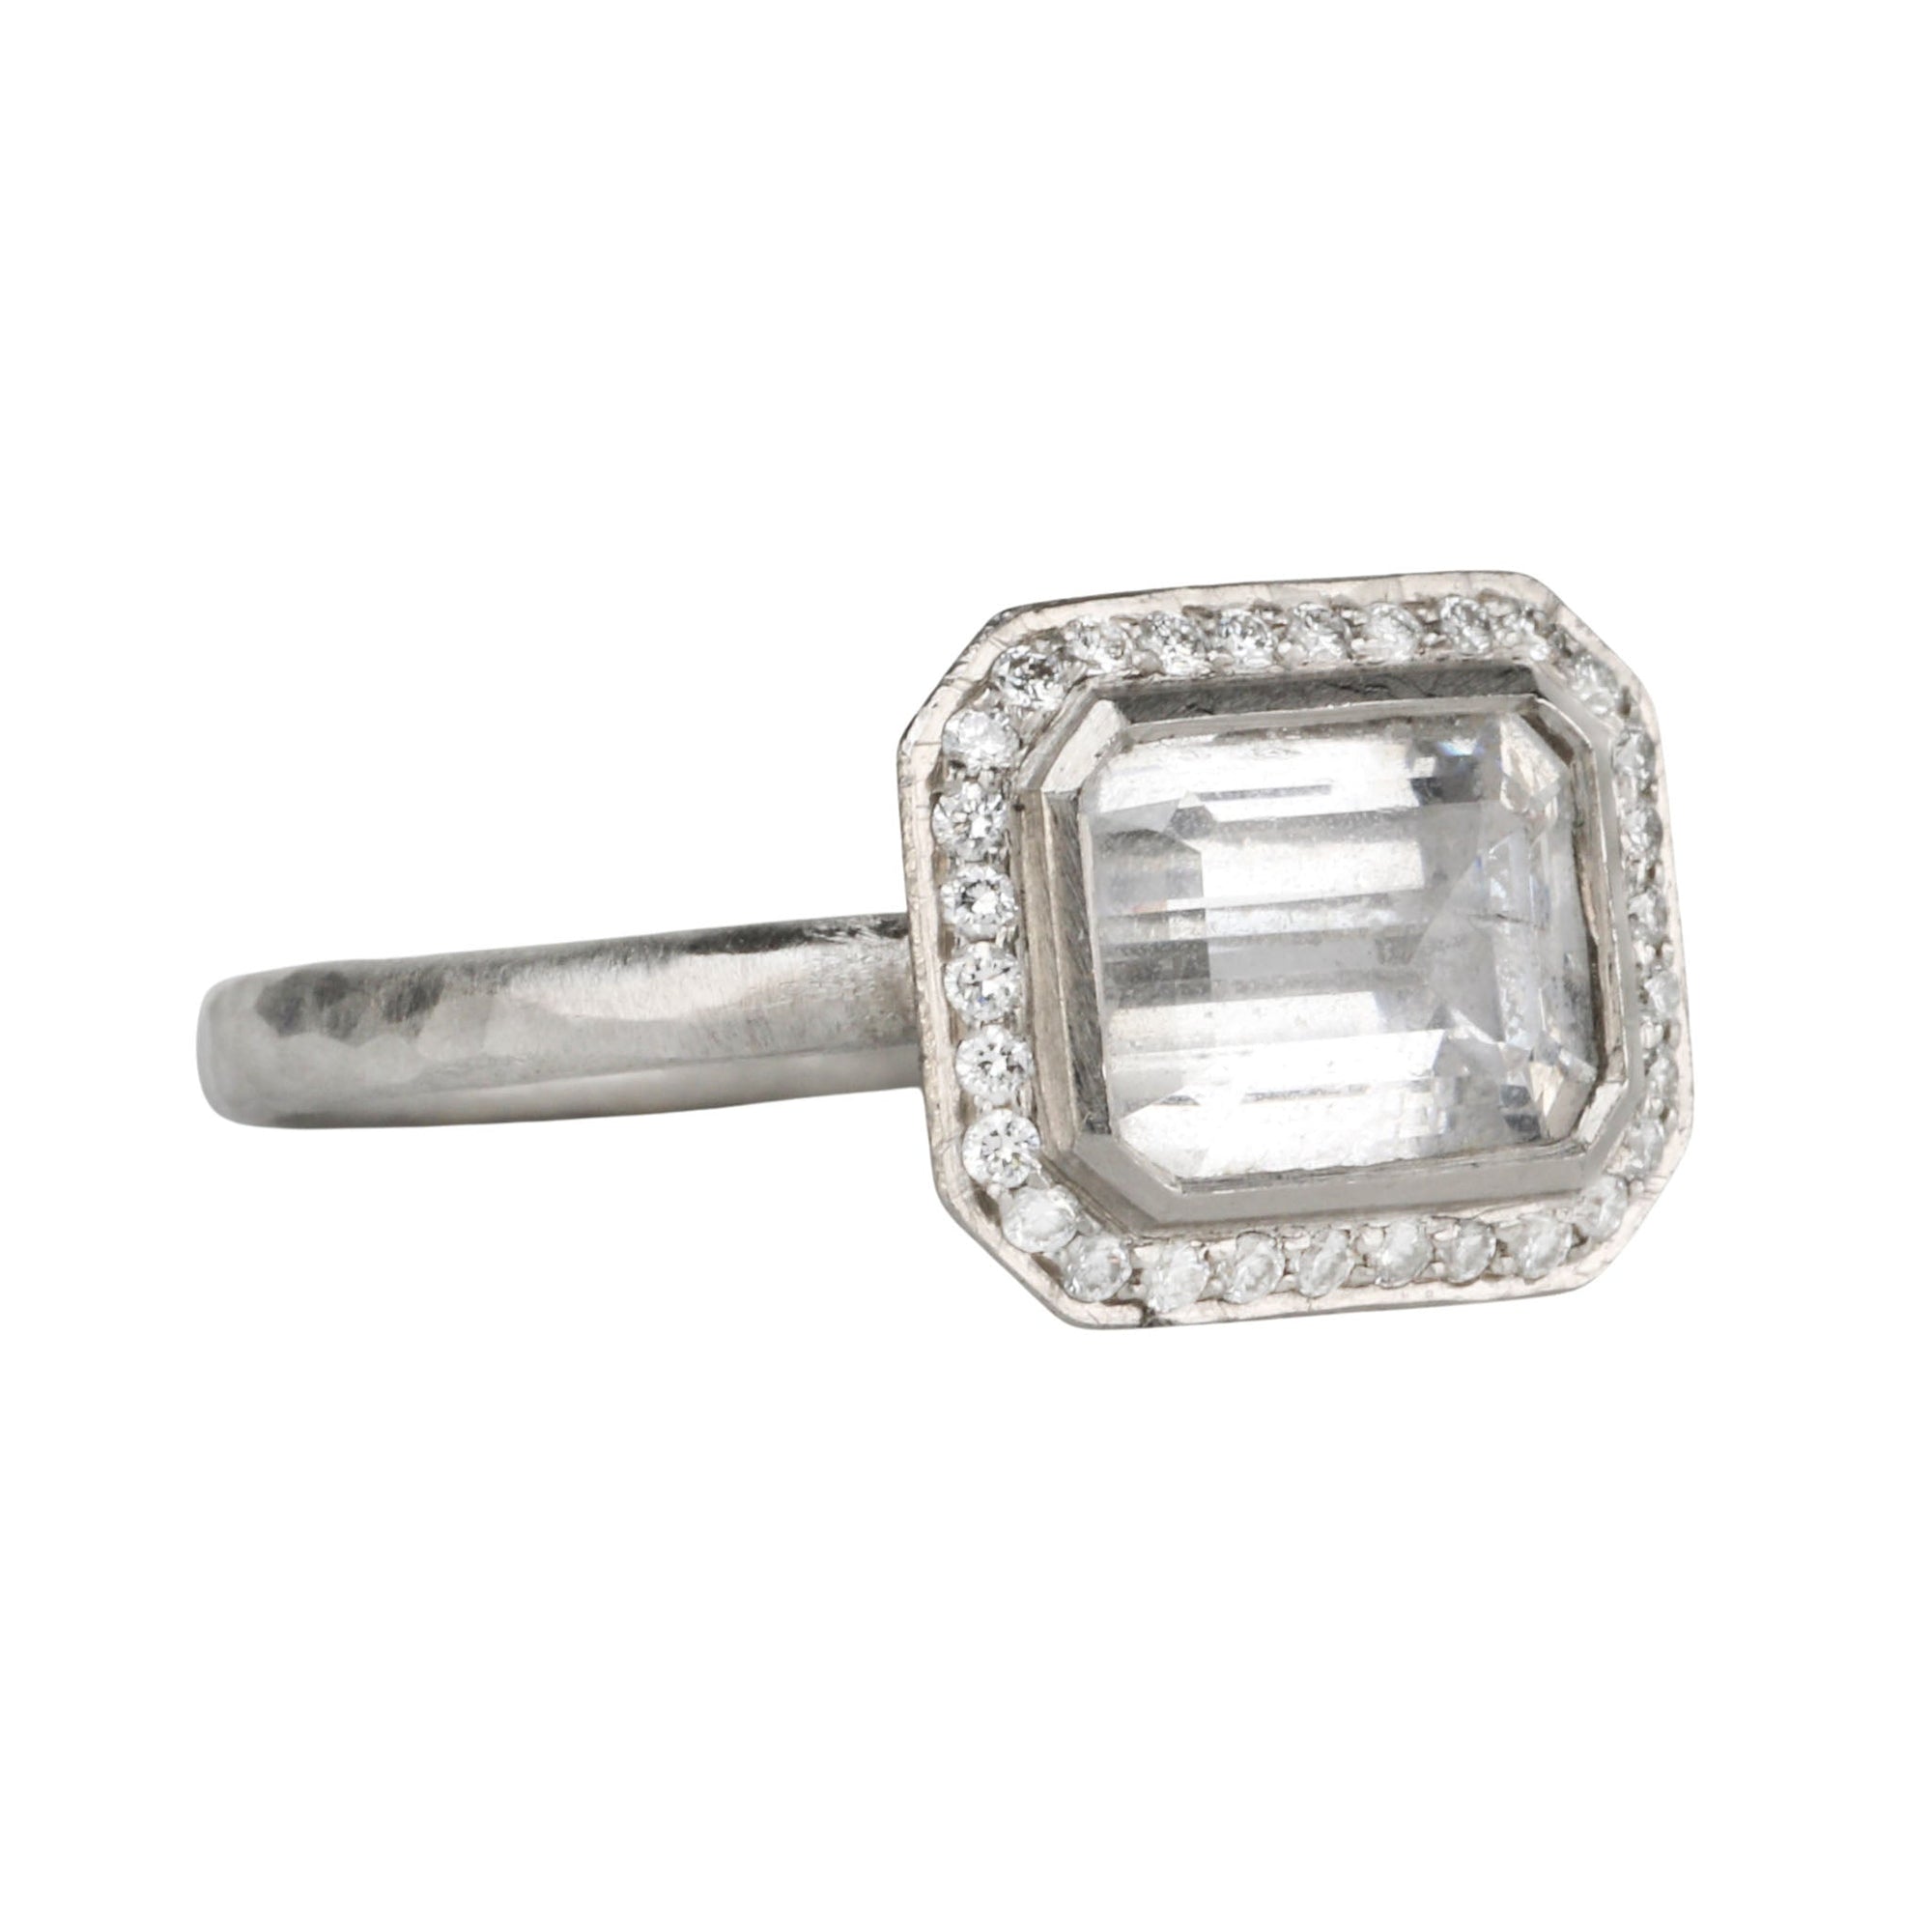 Platinum &amp; East-West Emerald-Cut White Sapphire Ring with Diamonds - Peridot Fine Jewelry - Annie Fensterstock